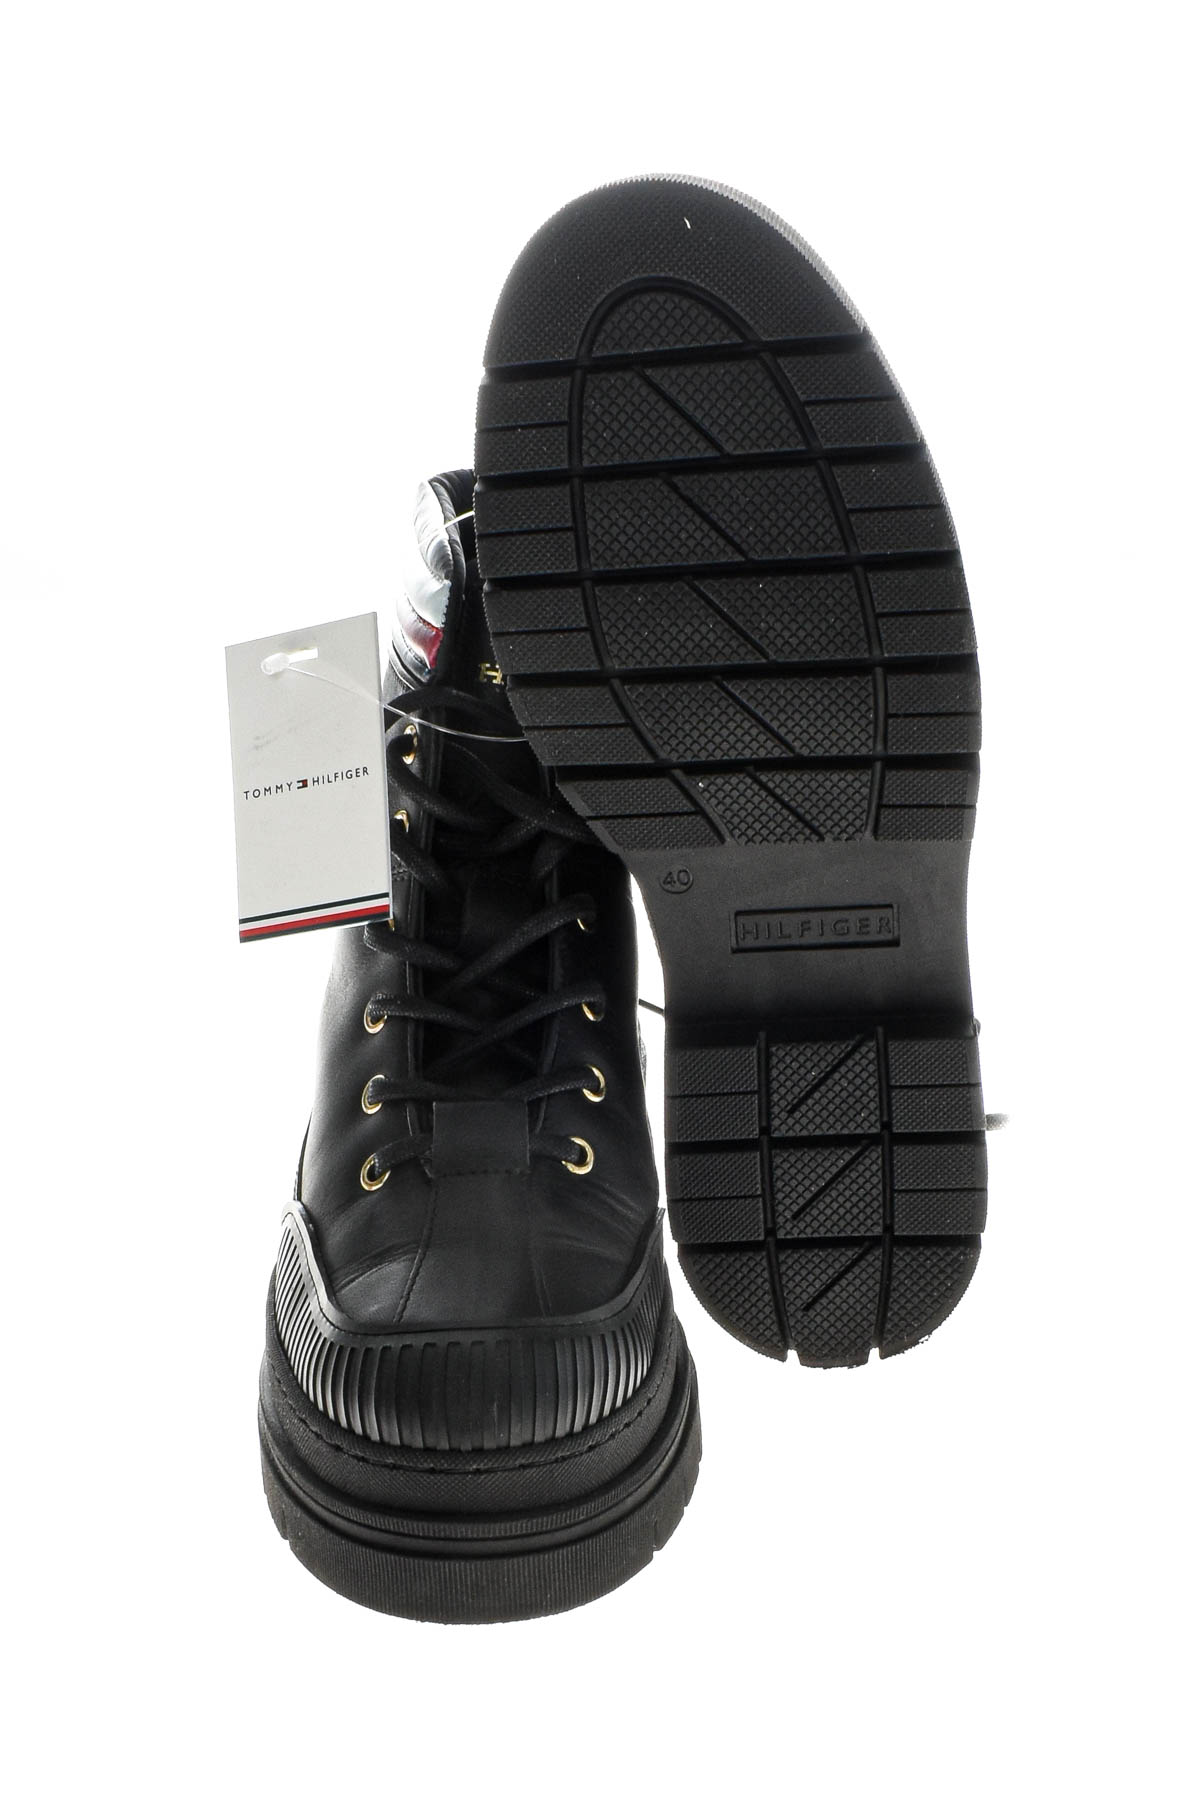 Women's boots - TOMMY HILFIGER - 3